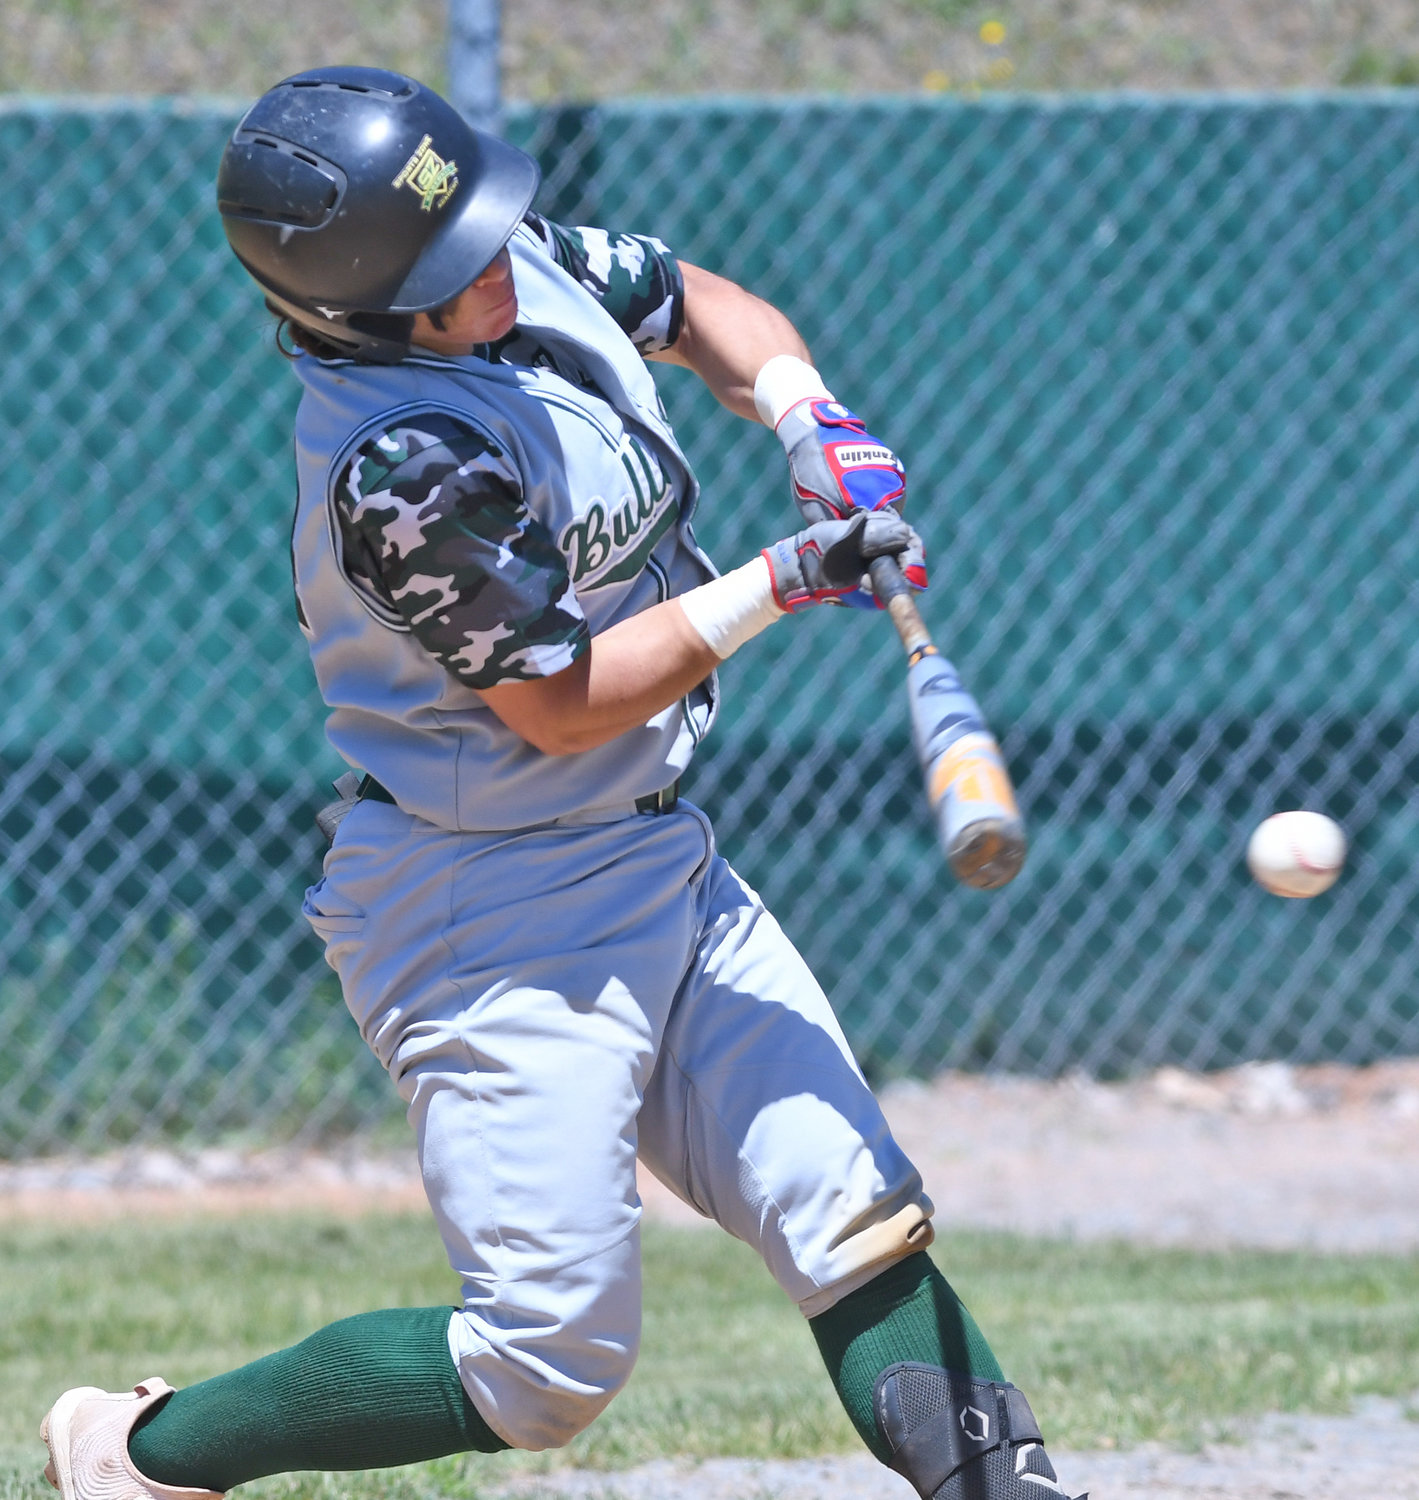 A BIG HIT — Westmoreland’s Caleb Miller gets a hit in this file photo from the 2021 season. Now a senior, Miller is off to a hot start and has big goals for himself and the team.